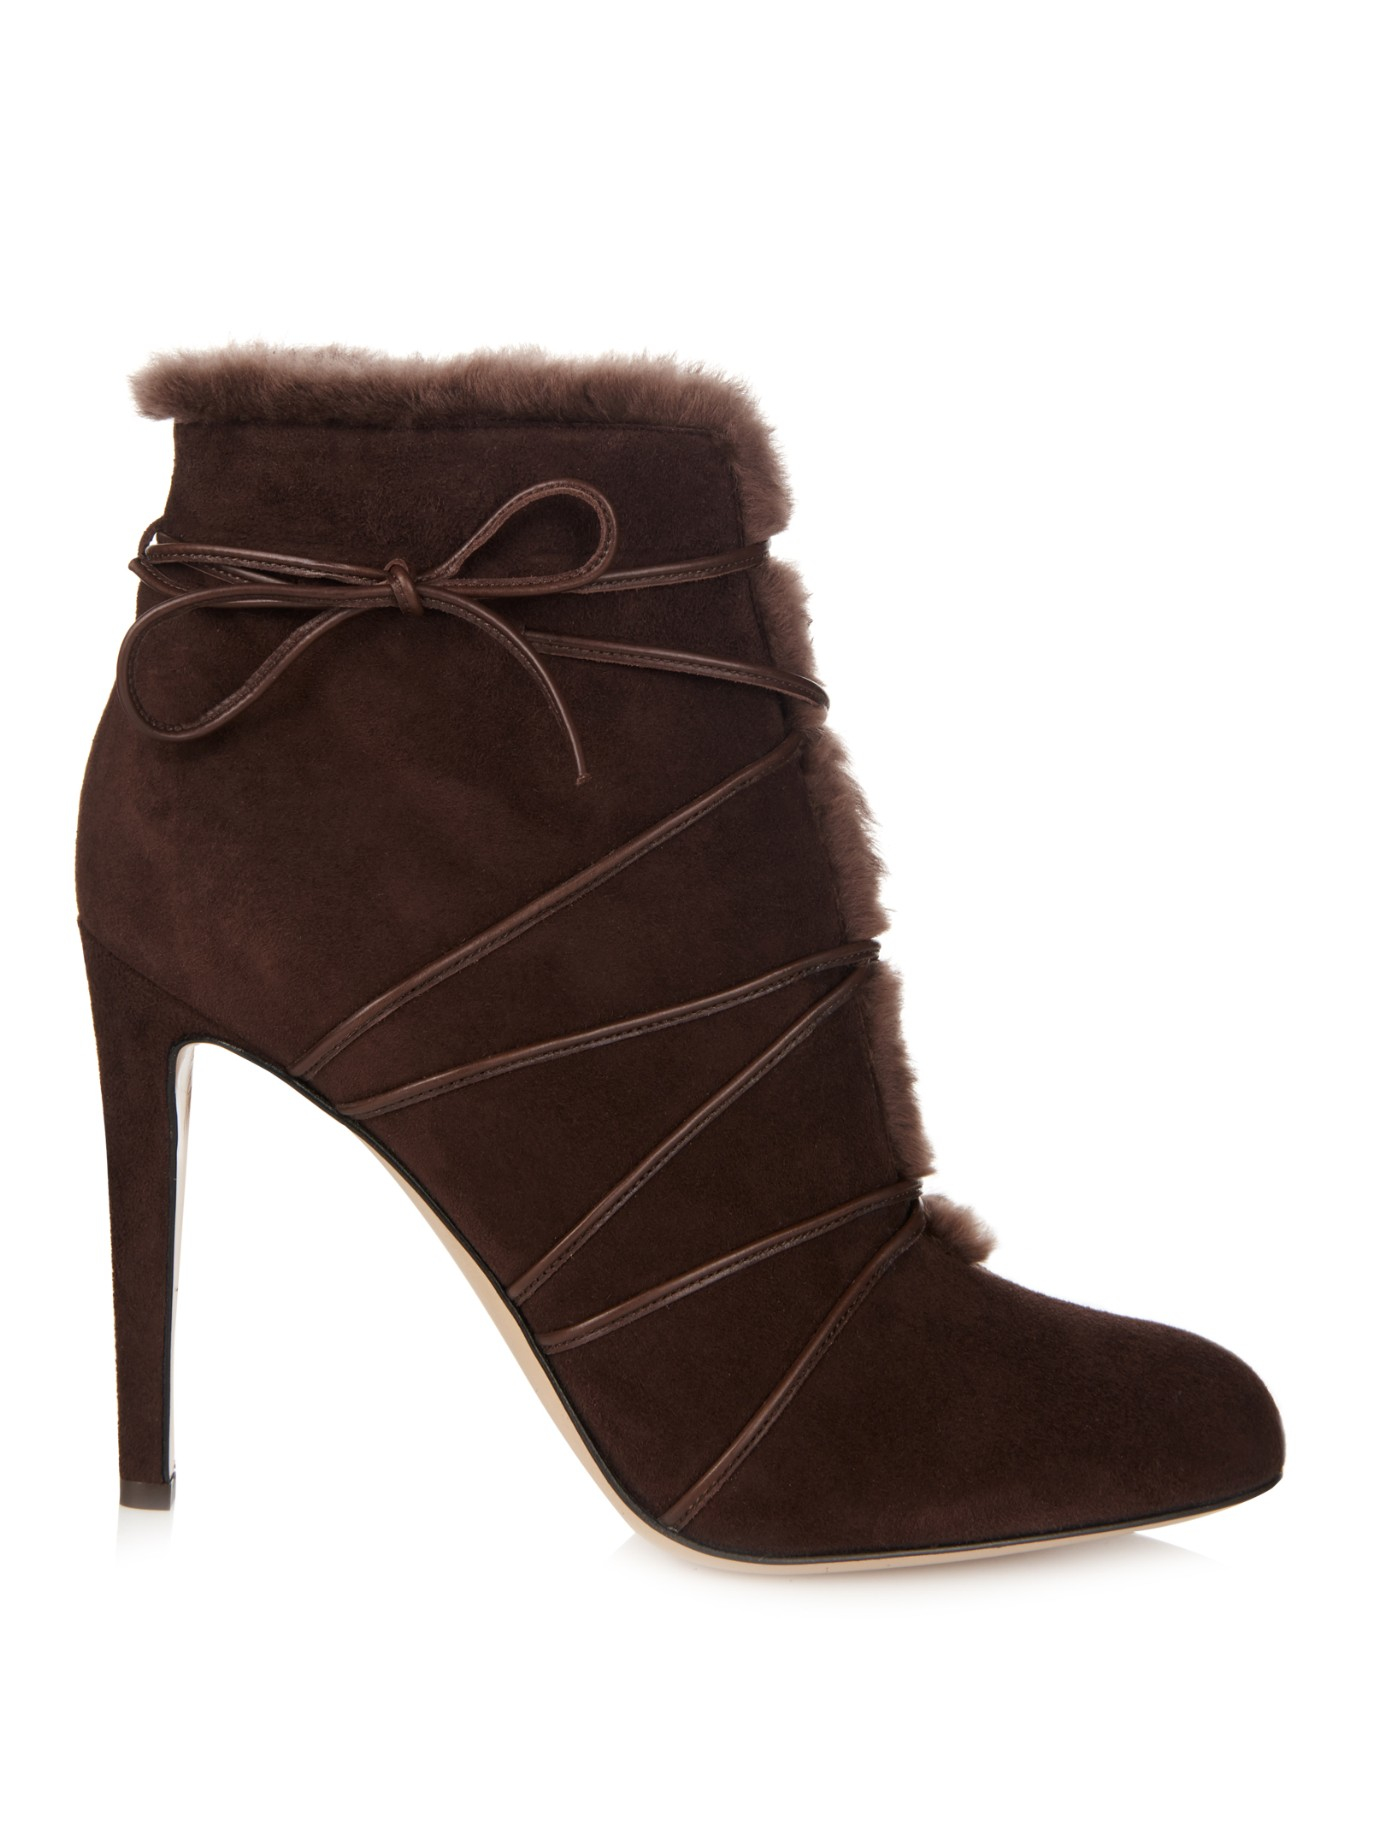 Gianvito rossi Lace-Up Shearling Ankle Boots in Brown | Lyst